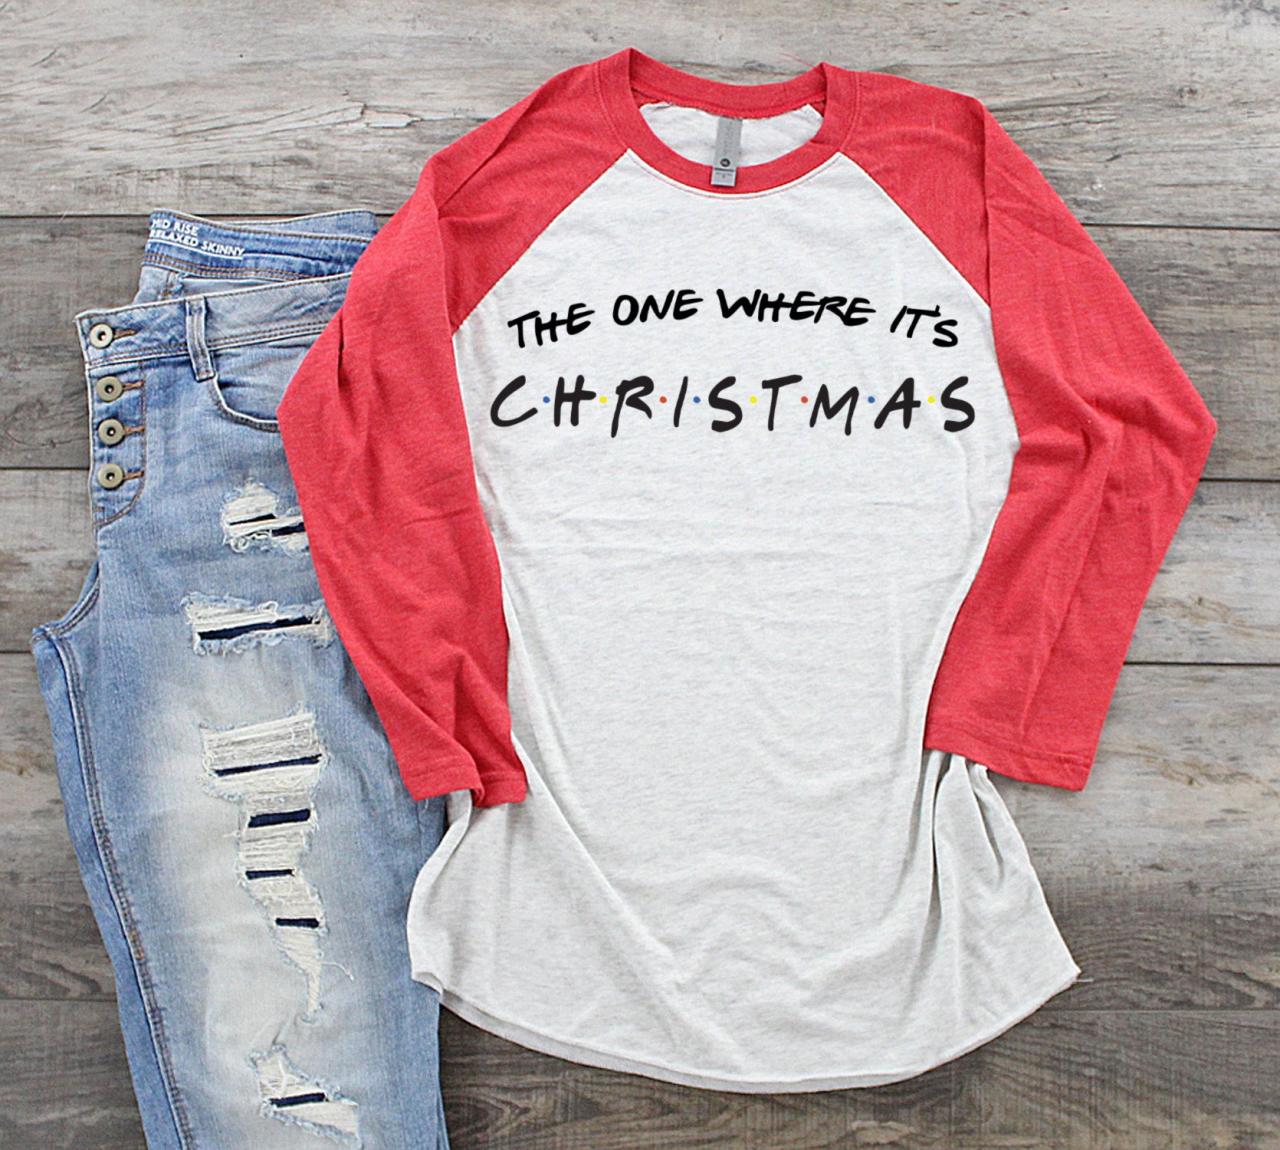 The One Where It's Christmas Shirt . Friends. Christmas Tee. Raglan. Sublimation. Next Level.